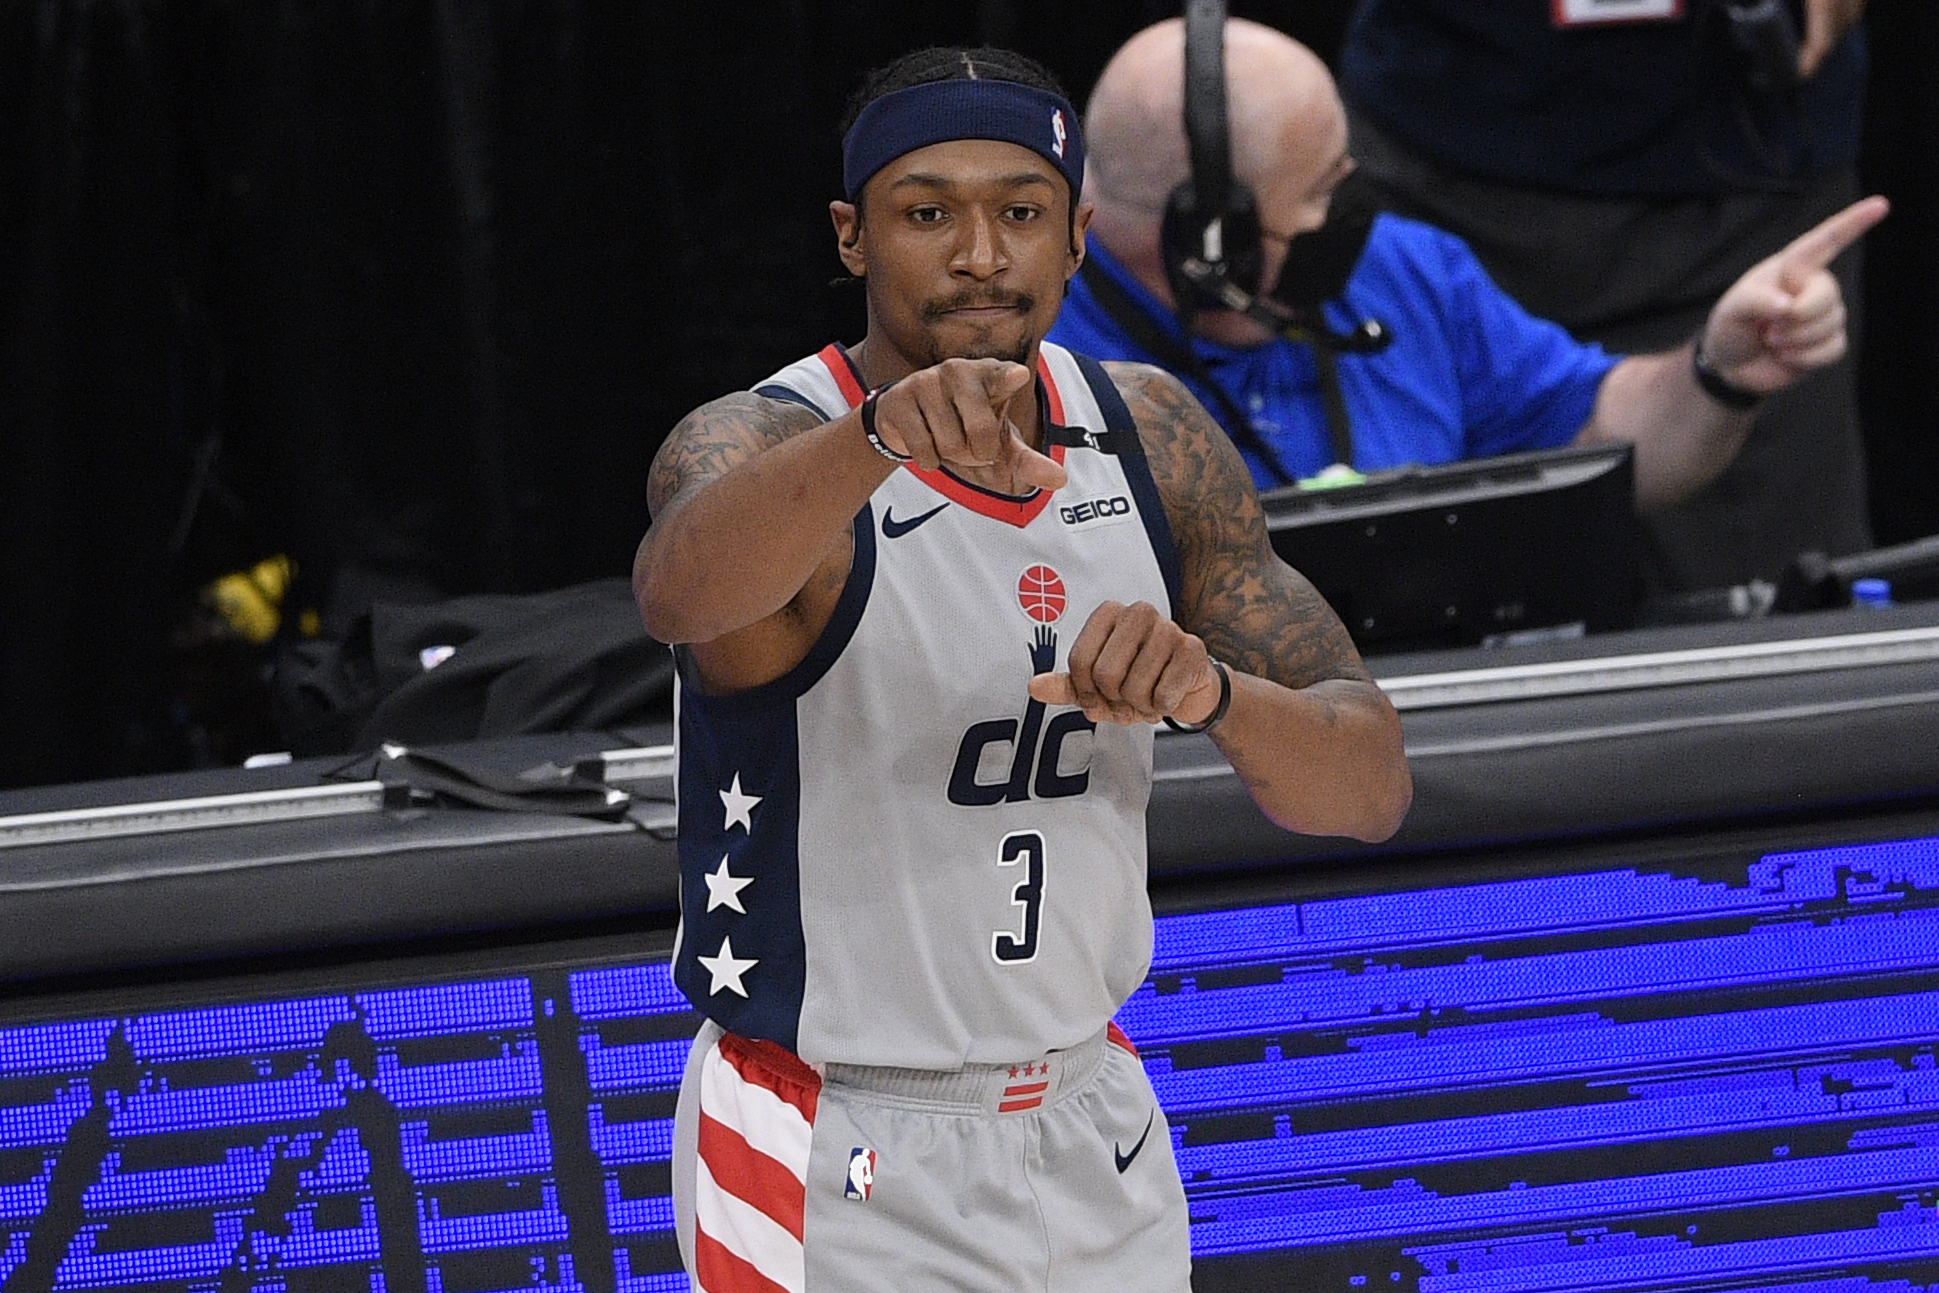 You a straight lame - Beal blasts Bazemore for making jokes about his  injury - Basketball Network - Your daily dose of basketball